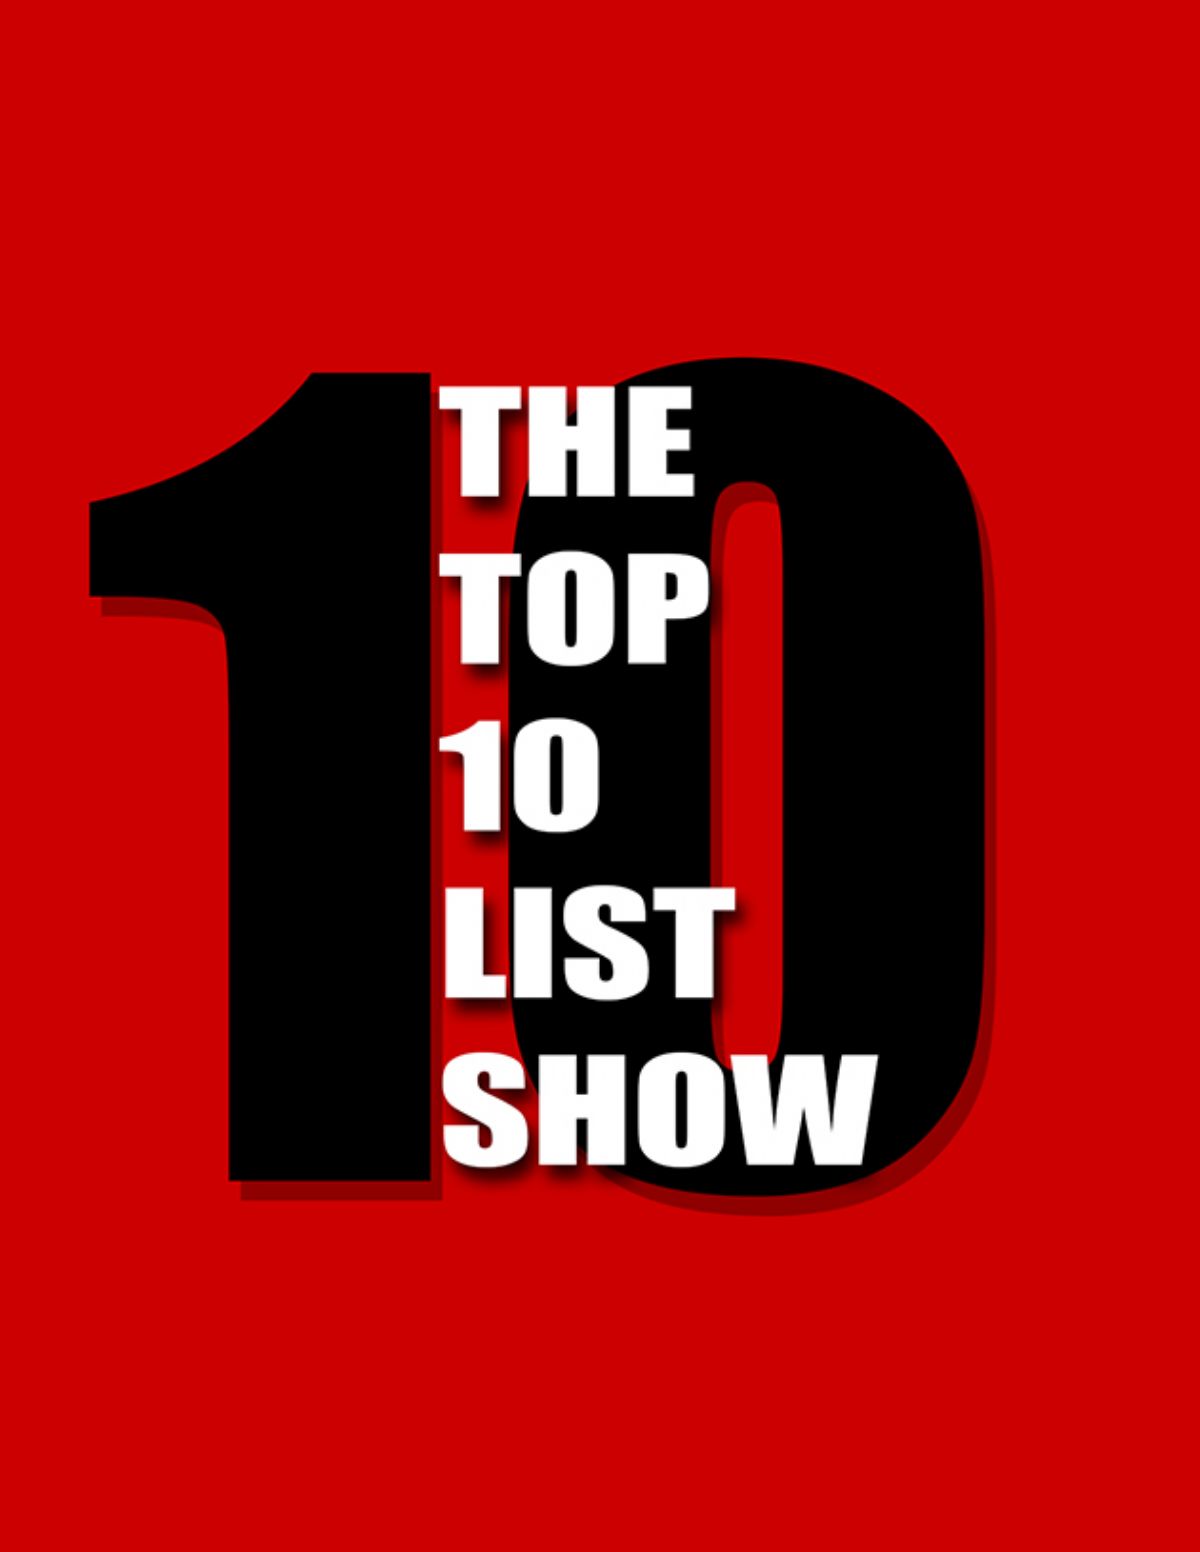 The Top 10 List Show